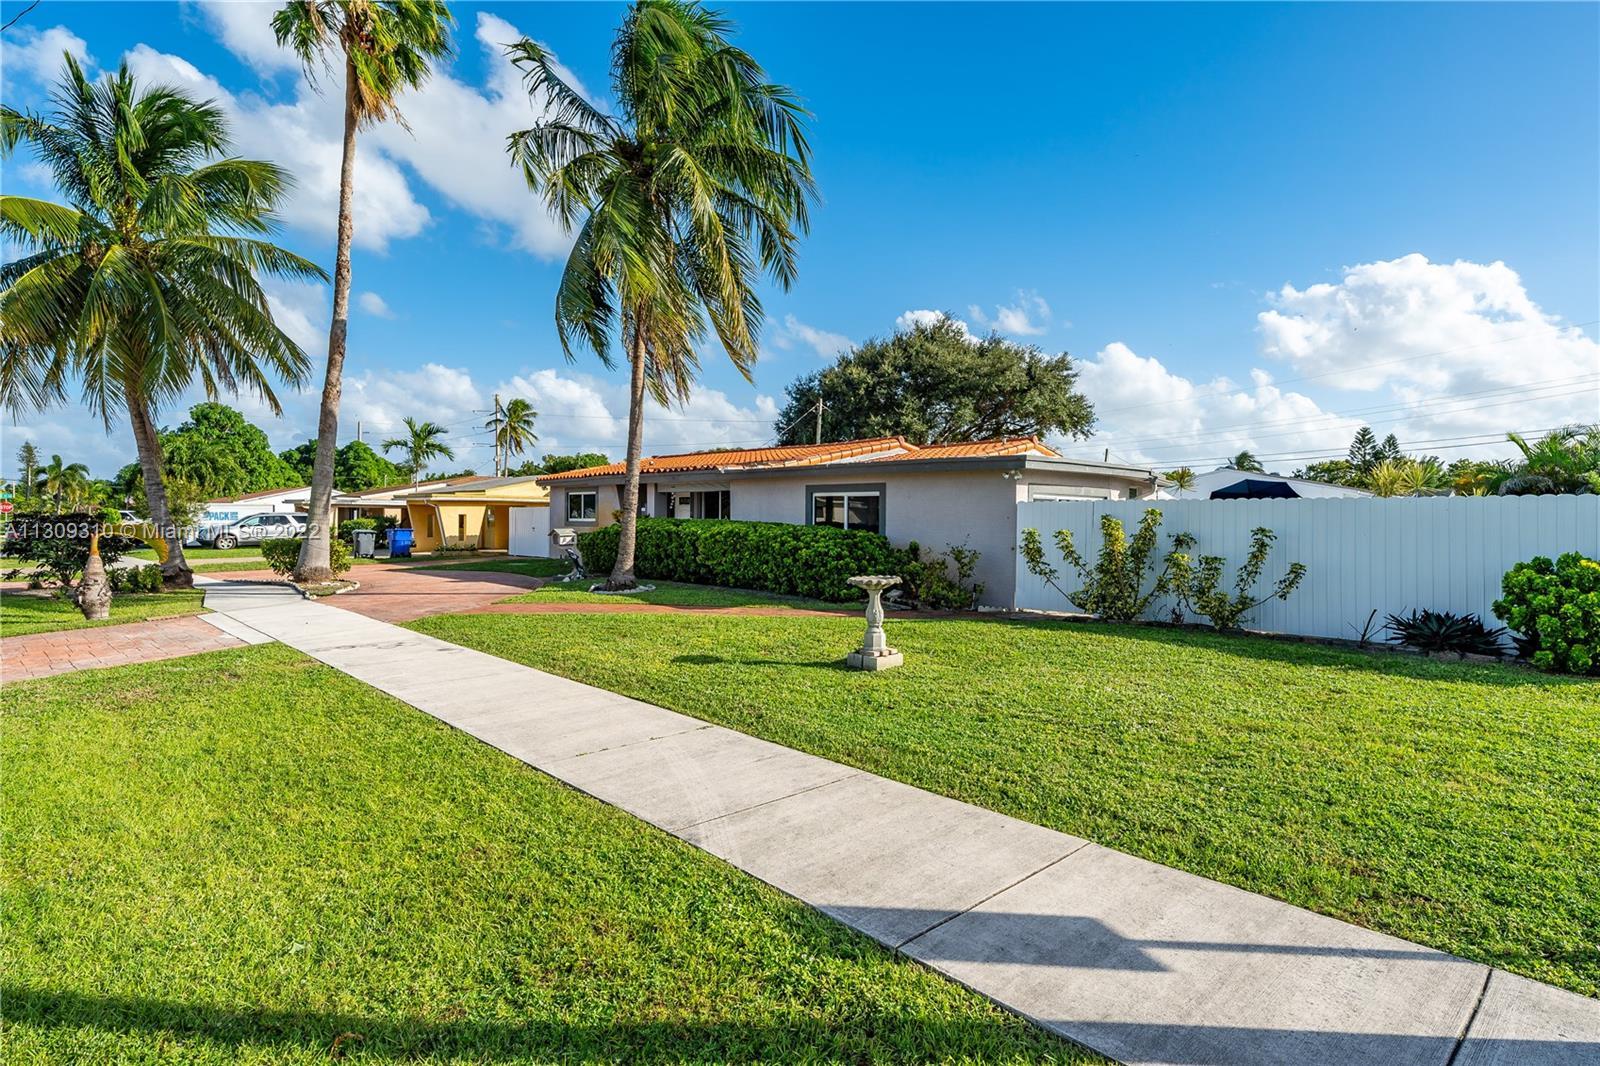 You will love this spacious 4 bedroom, 2 bath home in Hollywood, Florida. The property is located ju